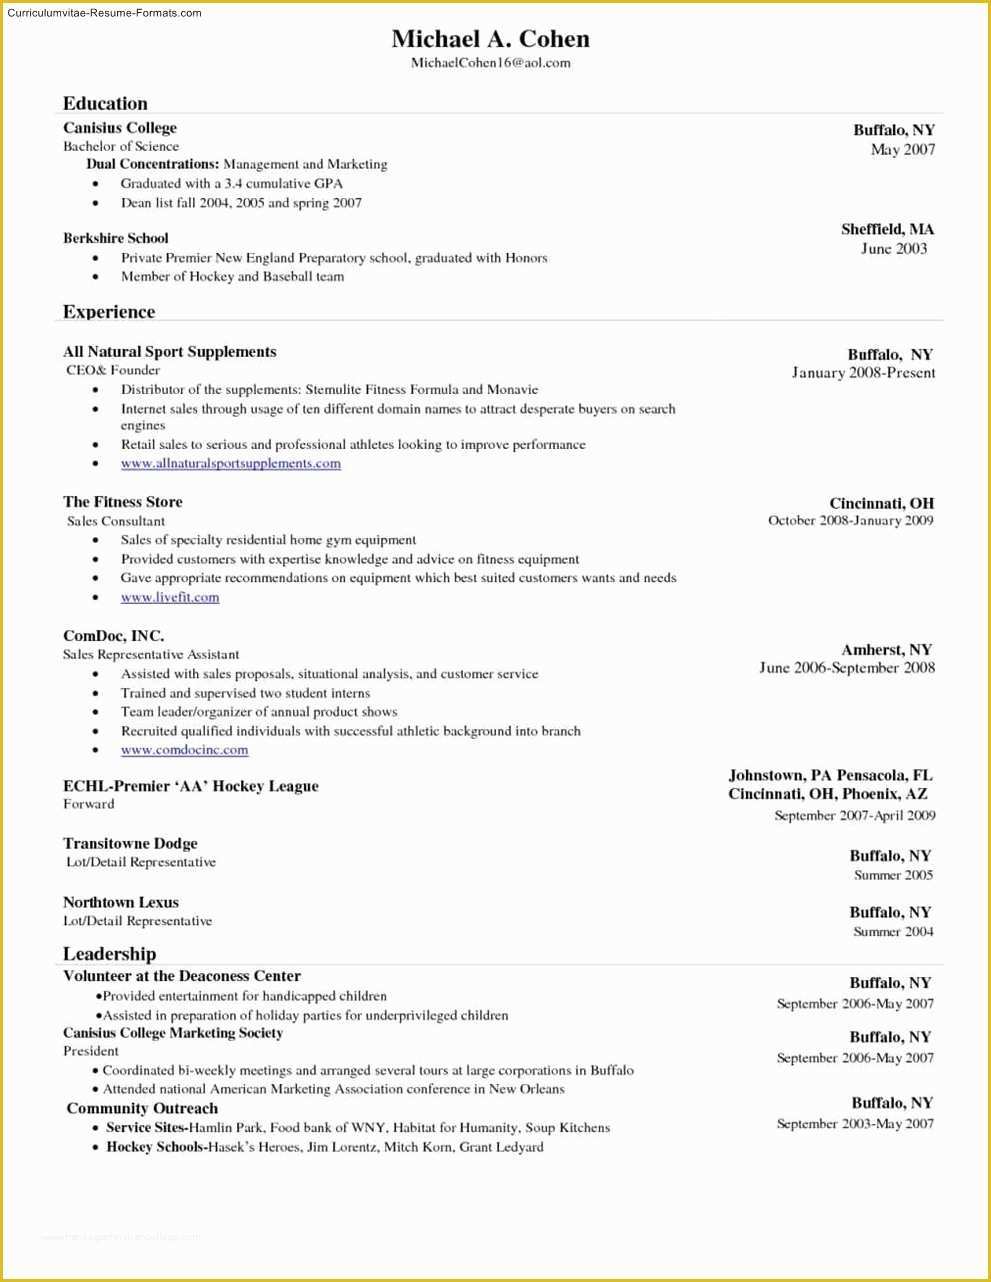 Resume Templates Free Download for Microsoft Word Of Microsoft Word 2010 Resume Template Download Free